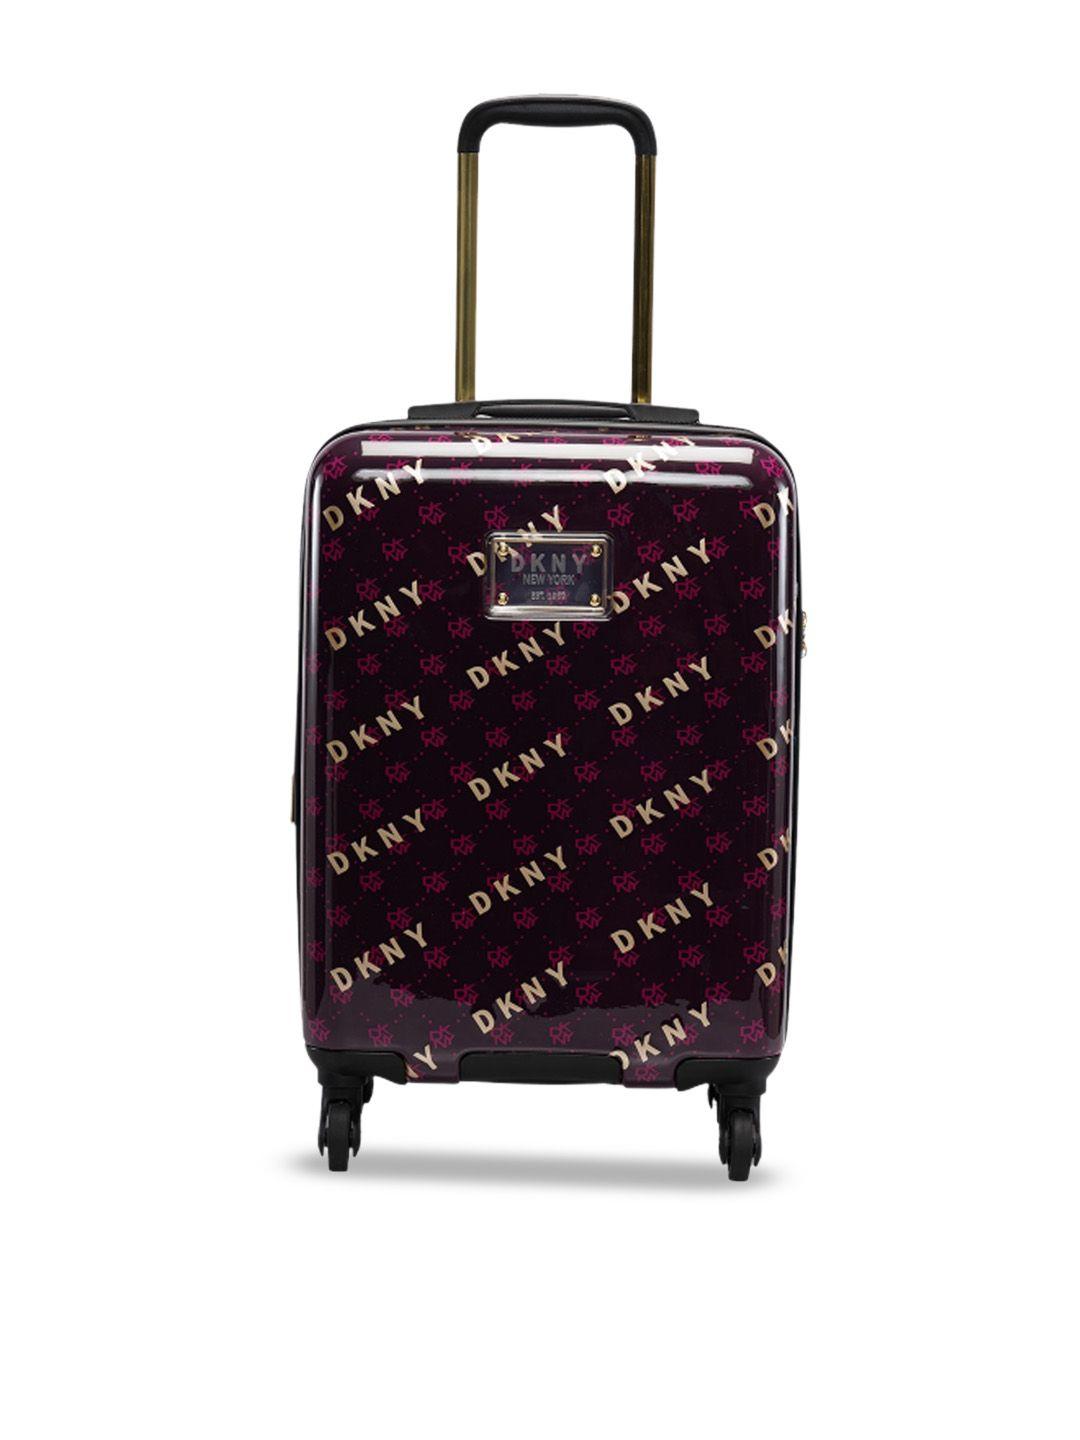 dkny on repeat printed abs material hard-sided cabin trolley suitcase